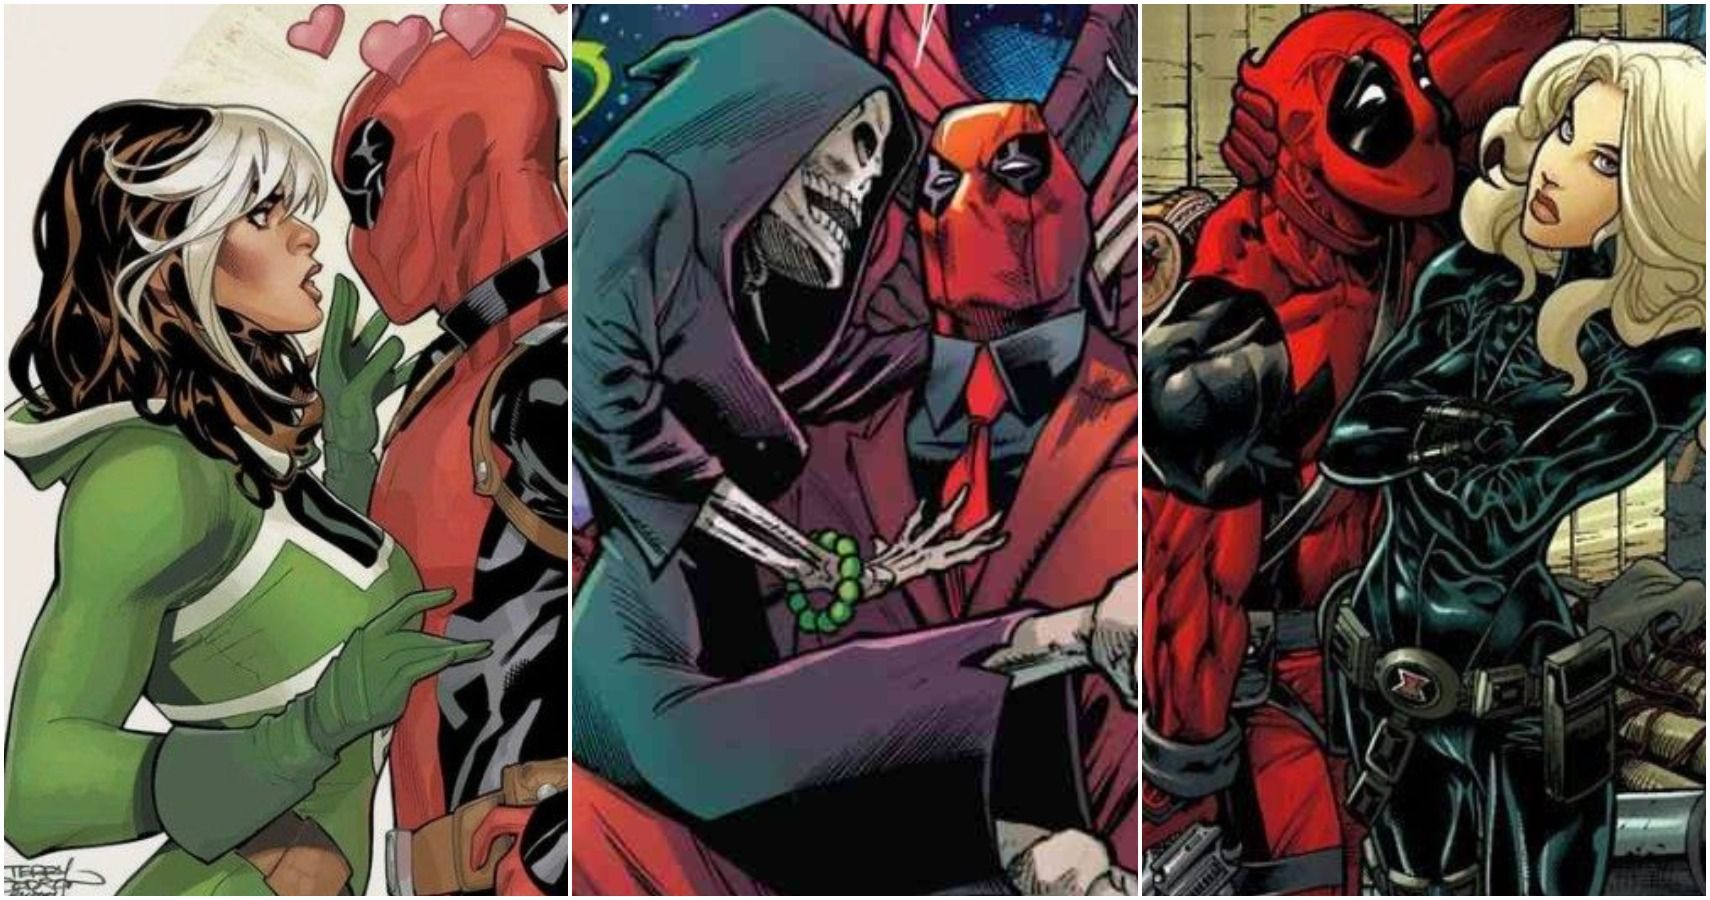 Who is Deadpool's crush?